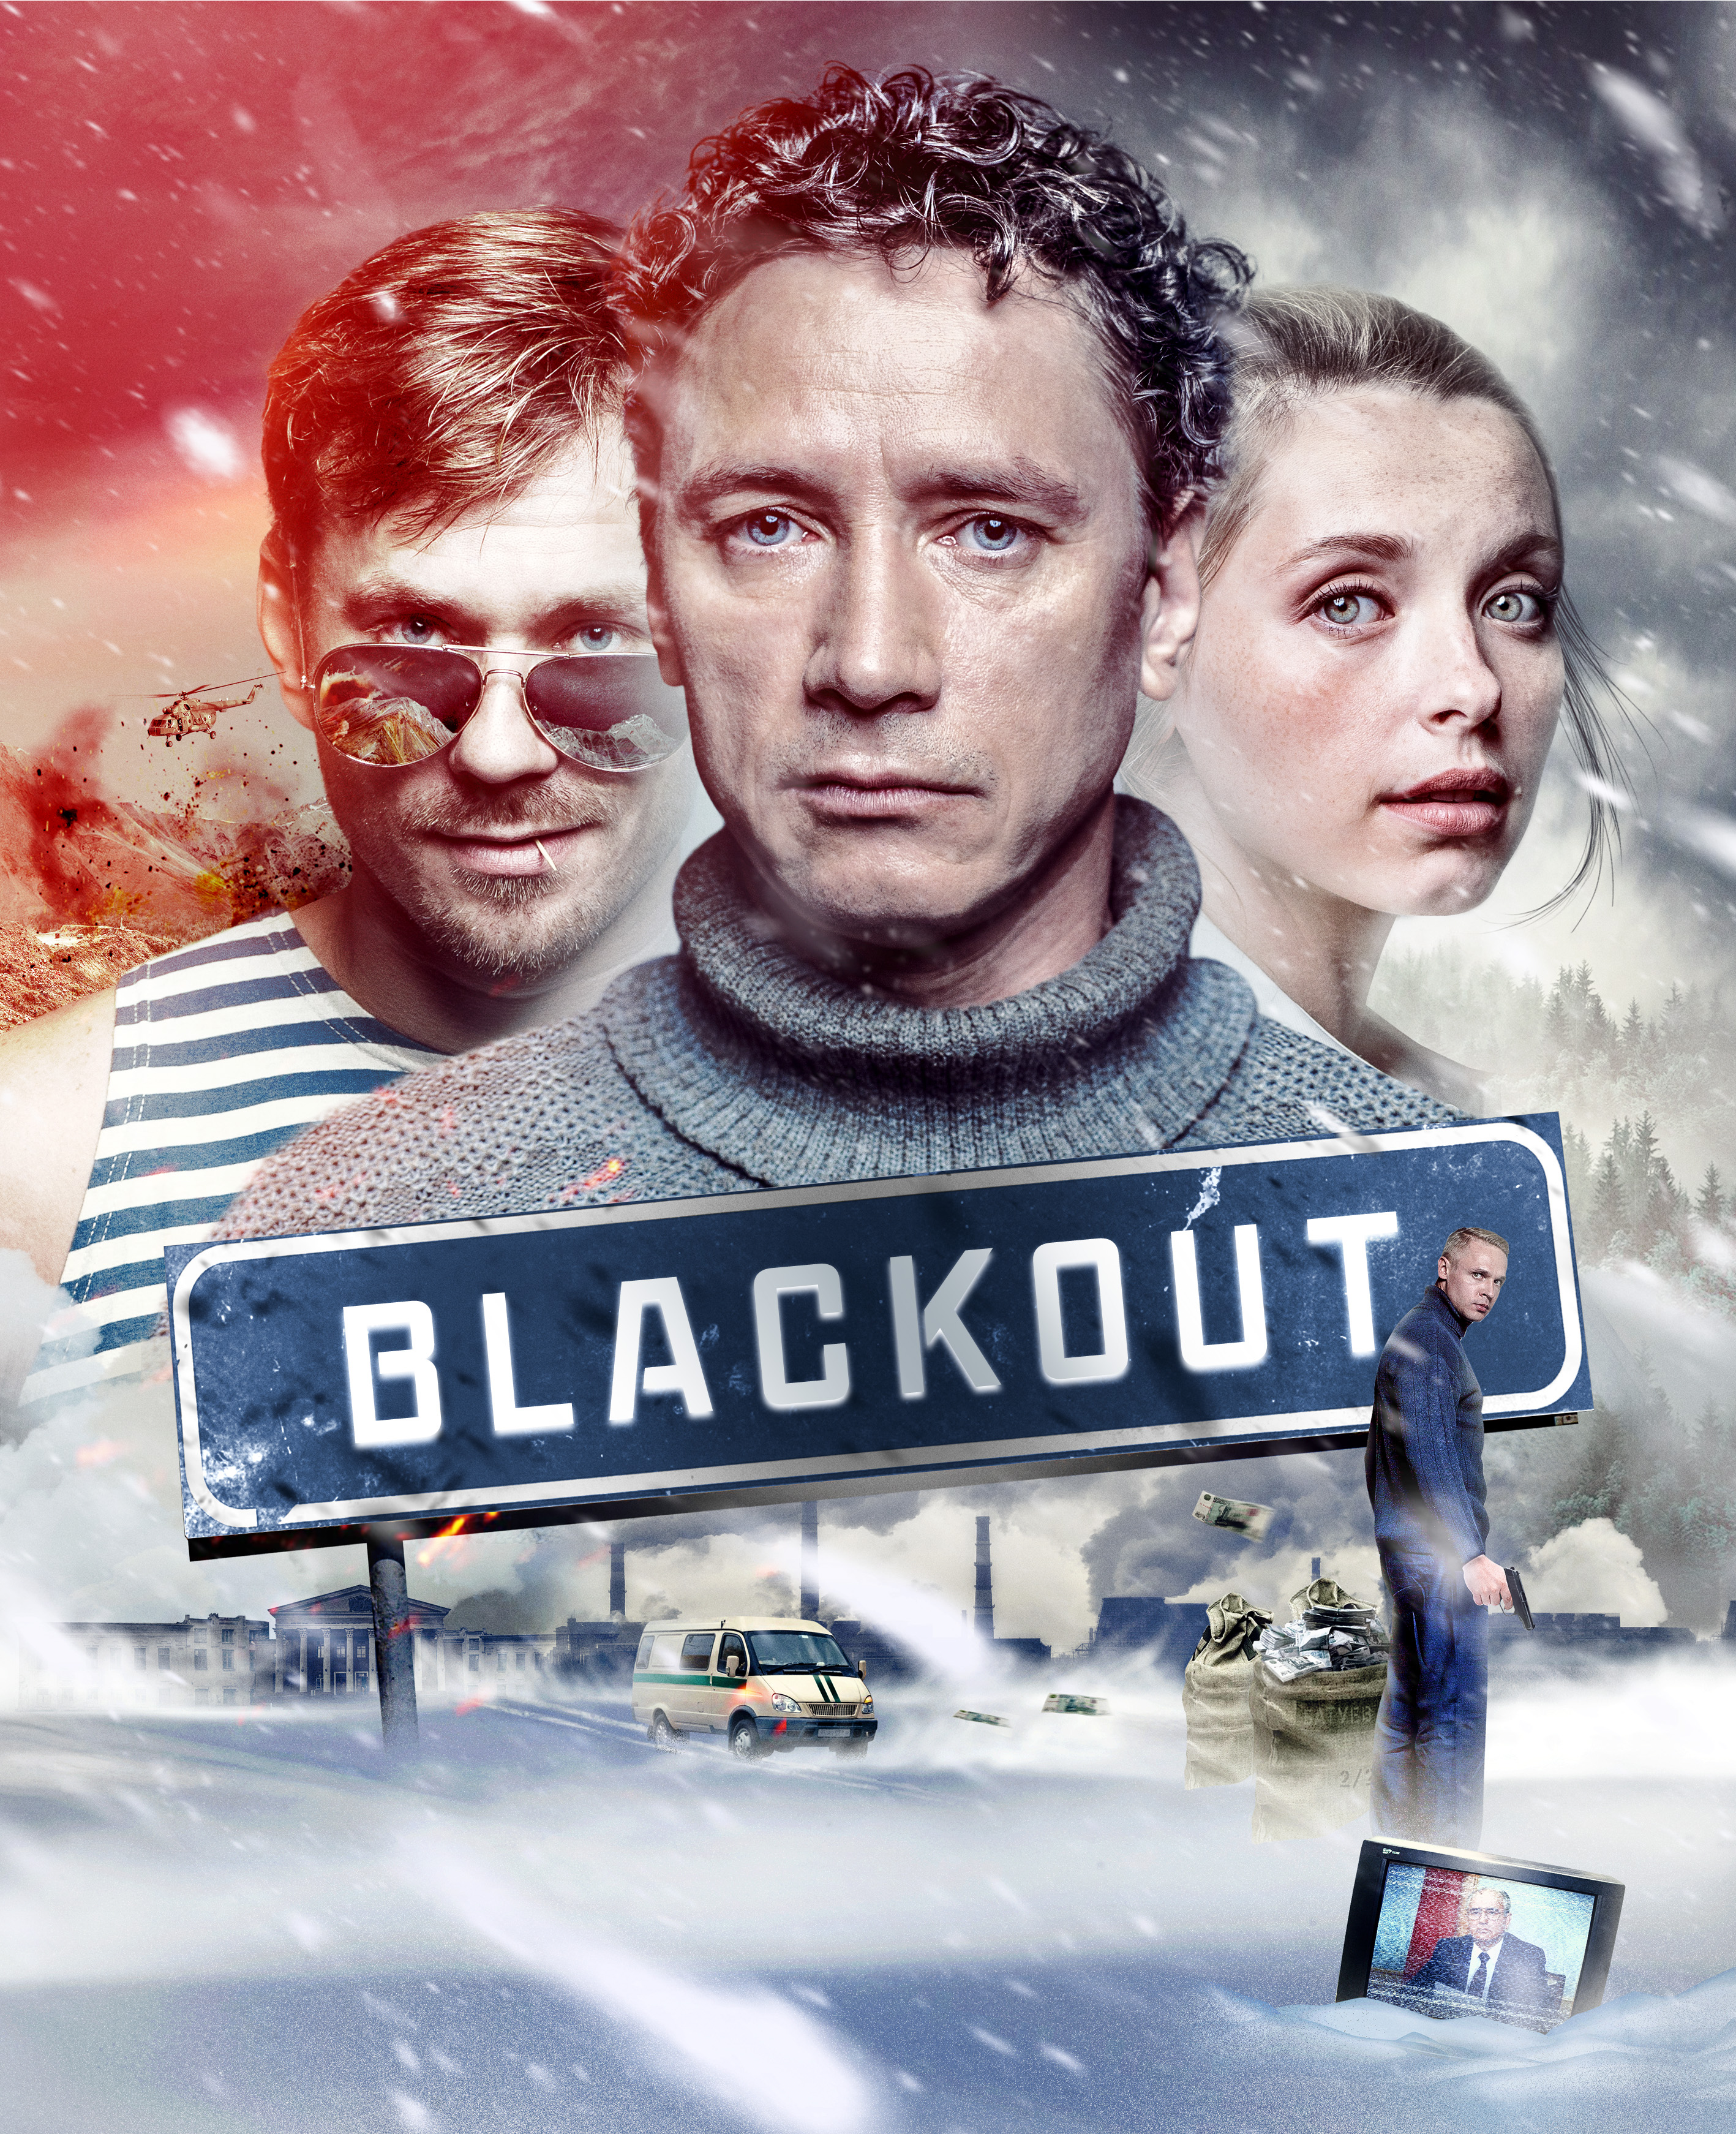 TV-SERIES BLACKOUT WON THE MAIN PRIZE OF THE SERIAL KILLER FESTIVAL